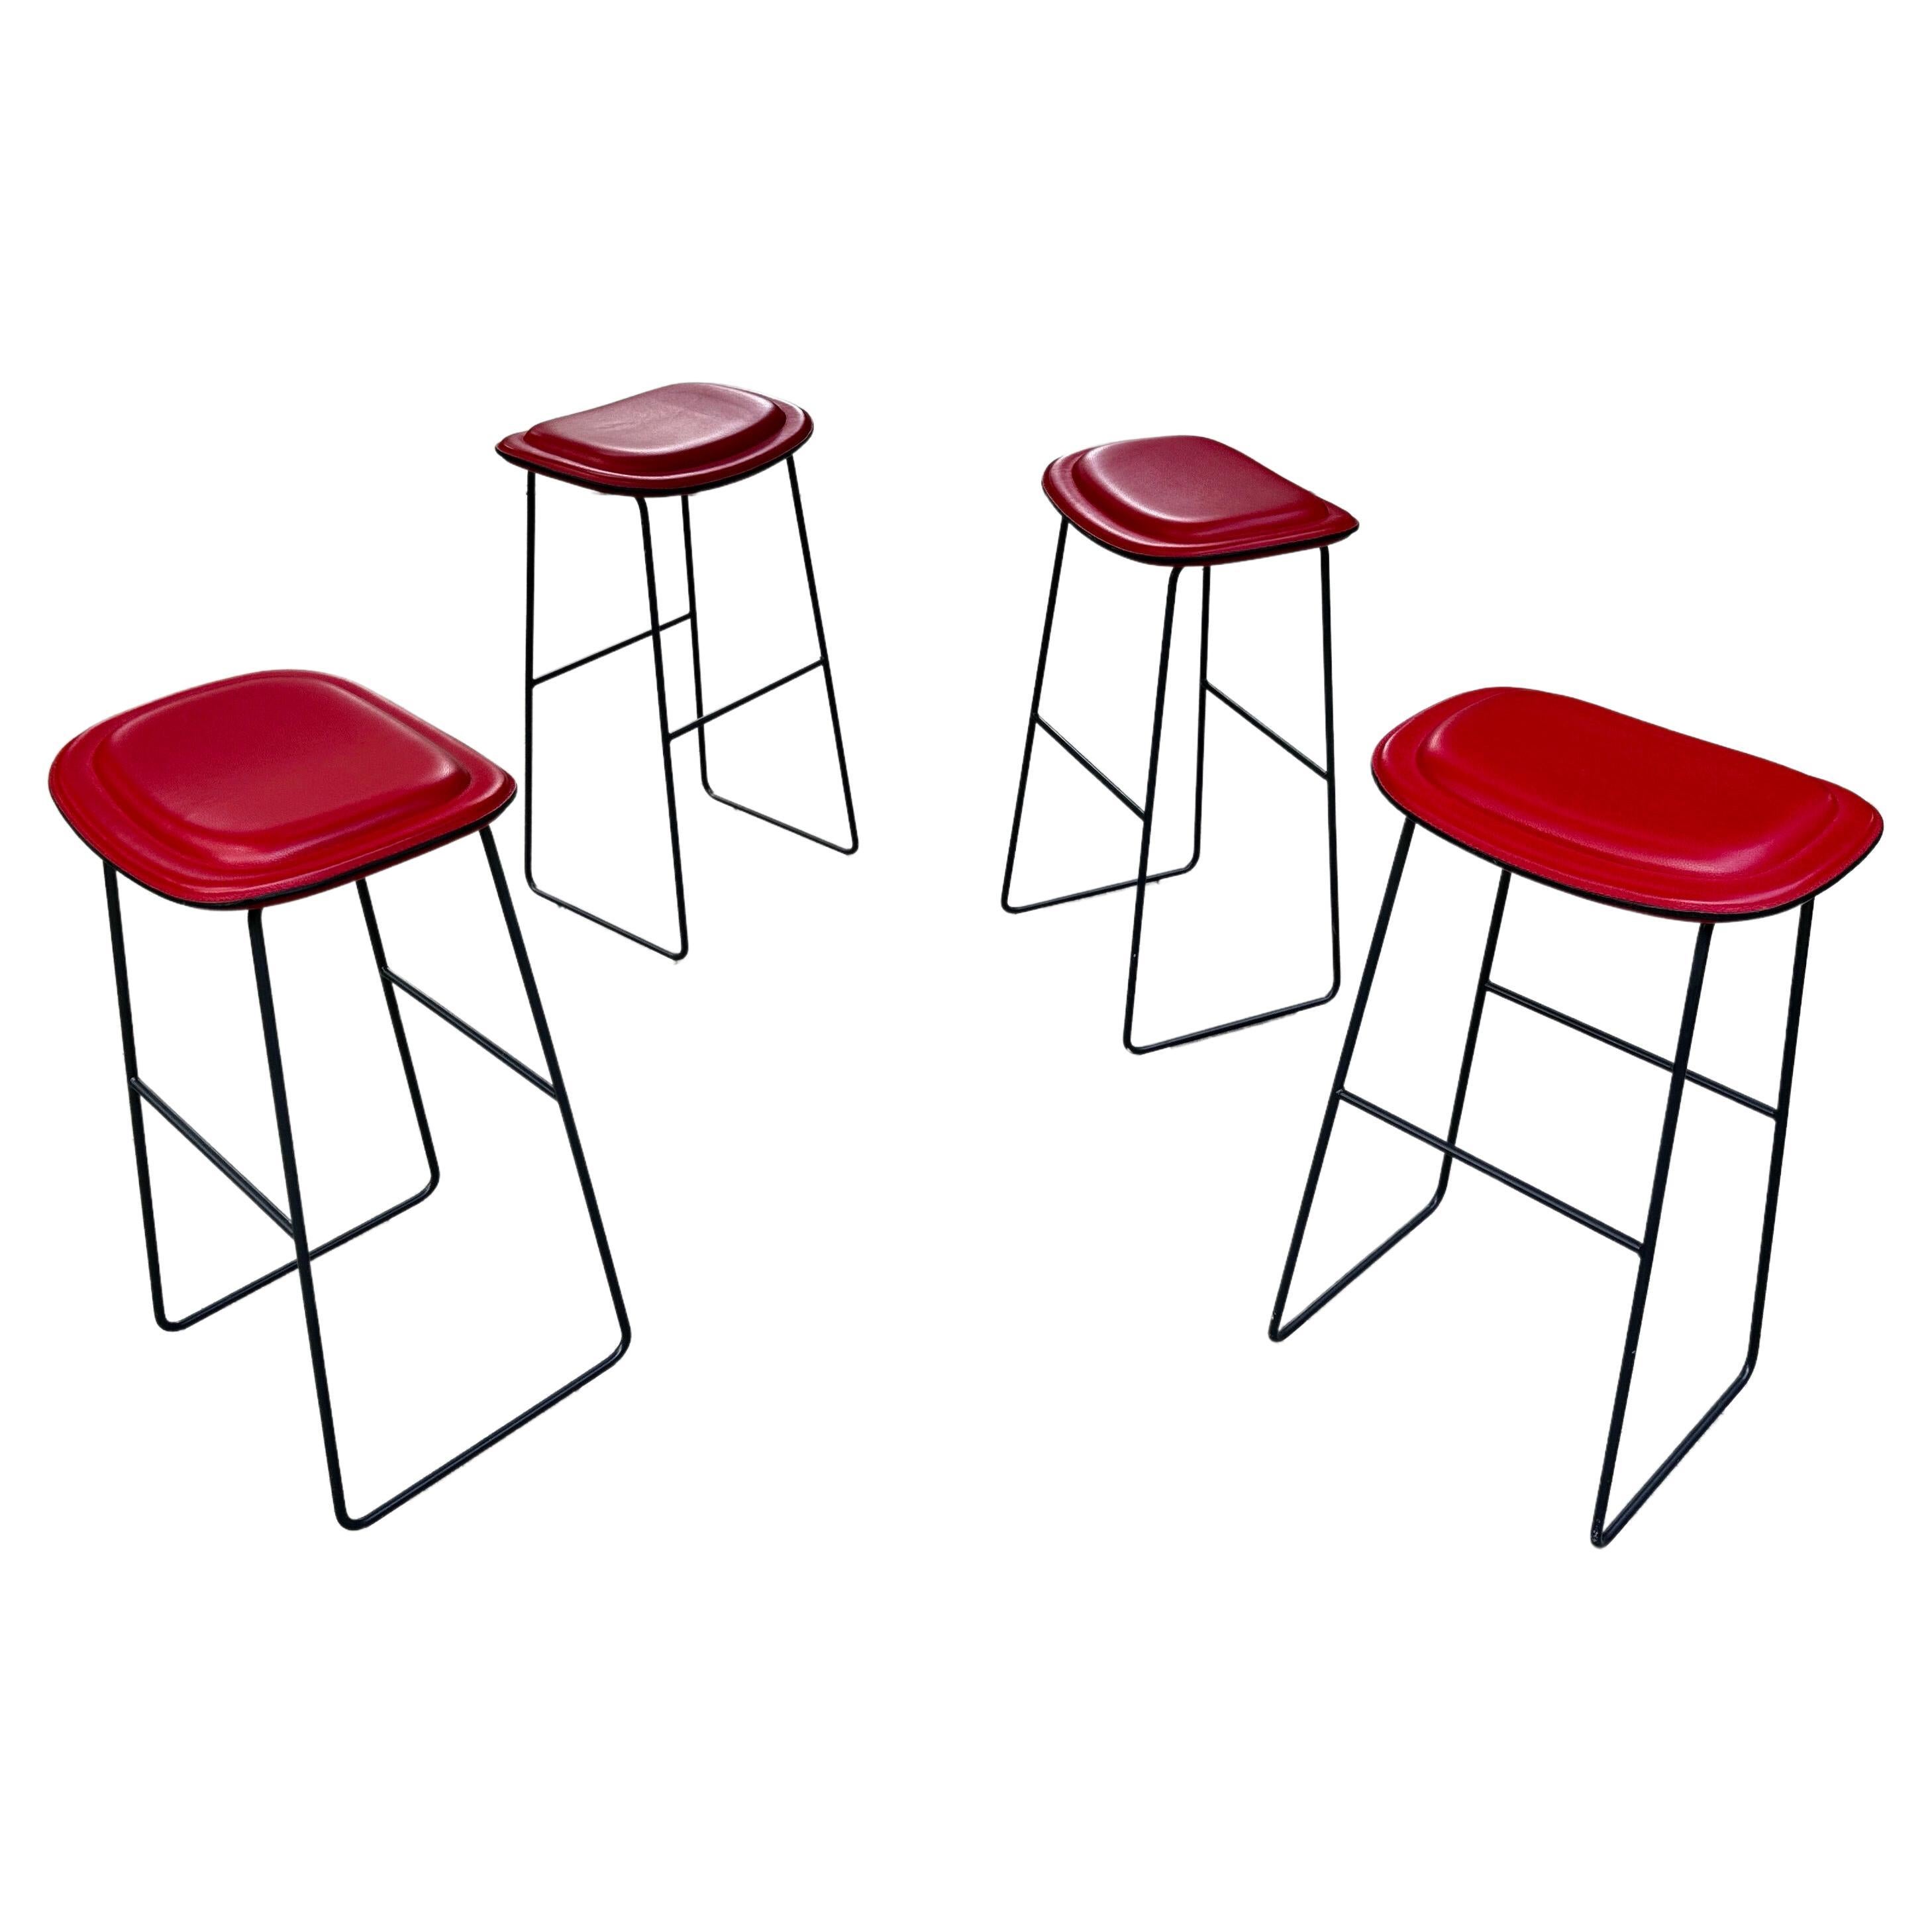 Four Jasper Morrison Hi Pad Stools In Red Leather by Cappellini For Sale